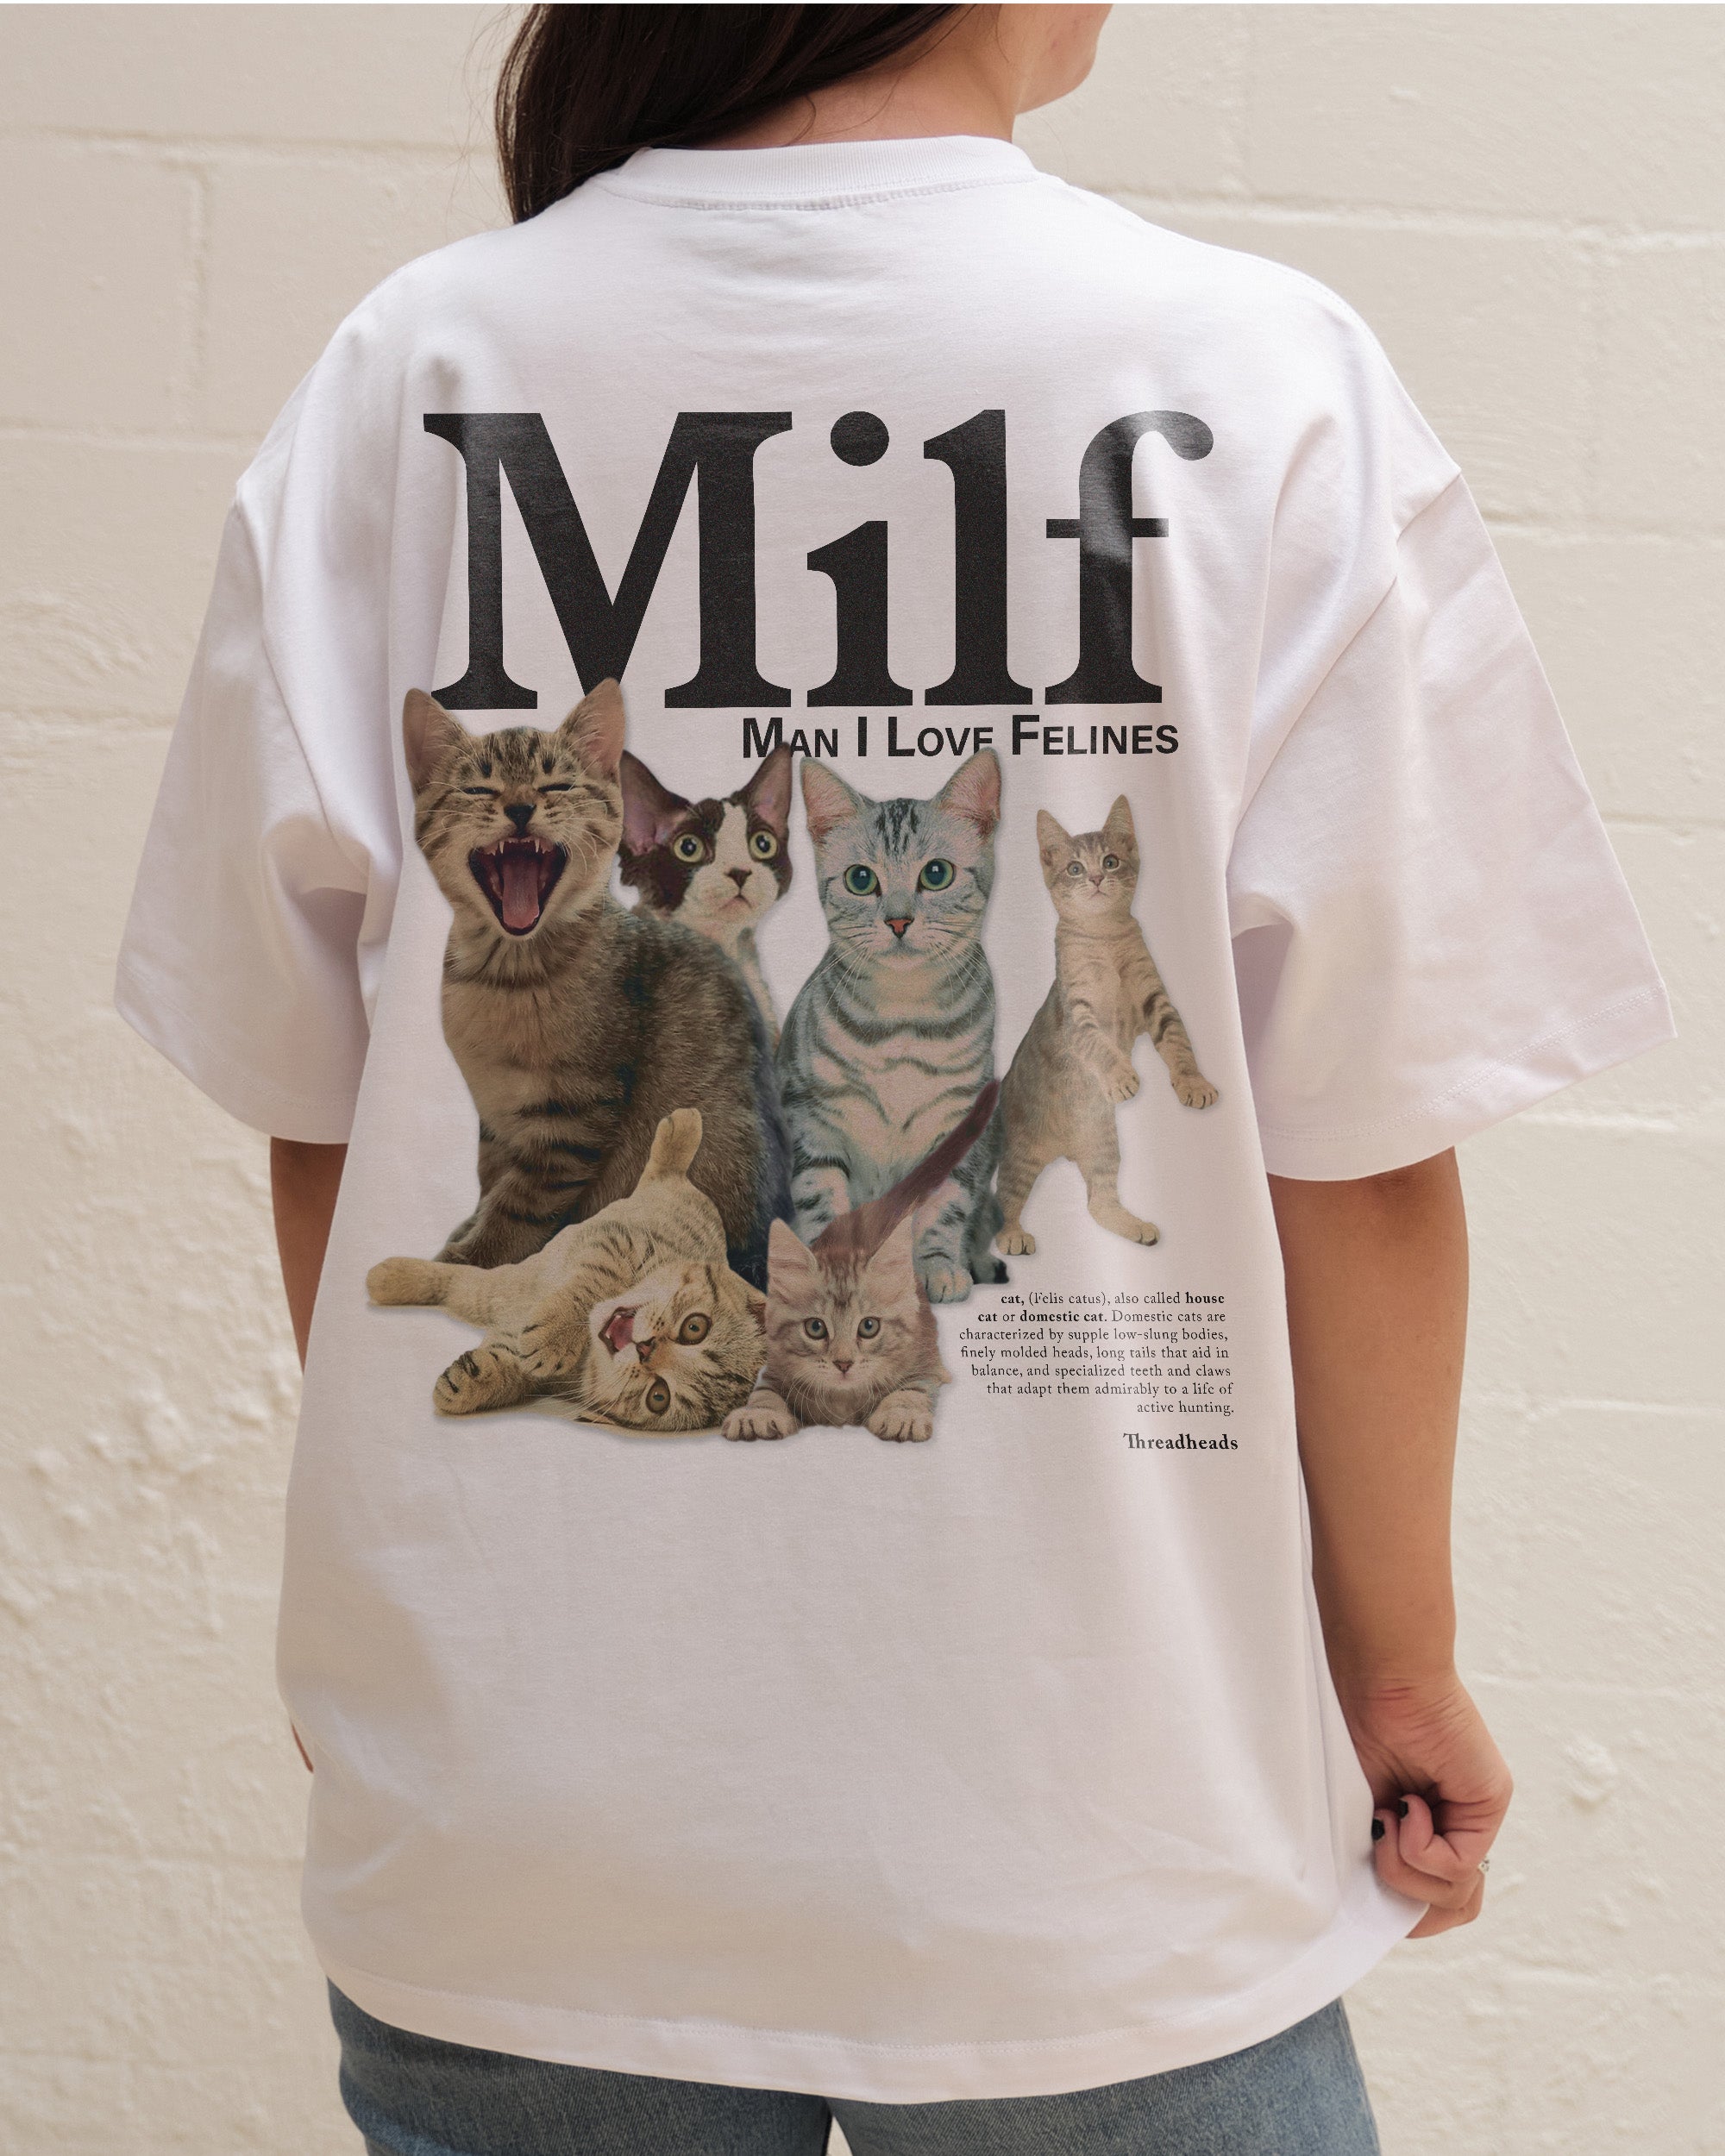 Man I Love Felines Front and Back Oversized Tee